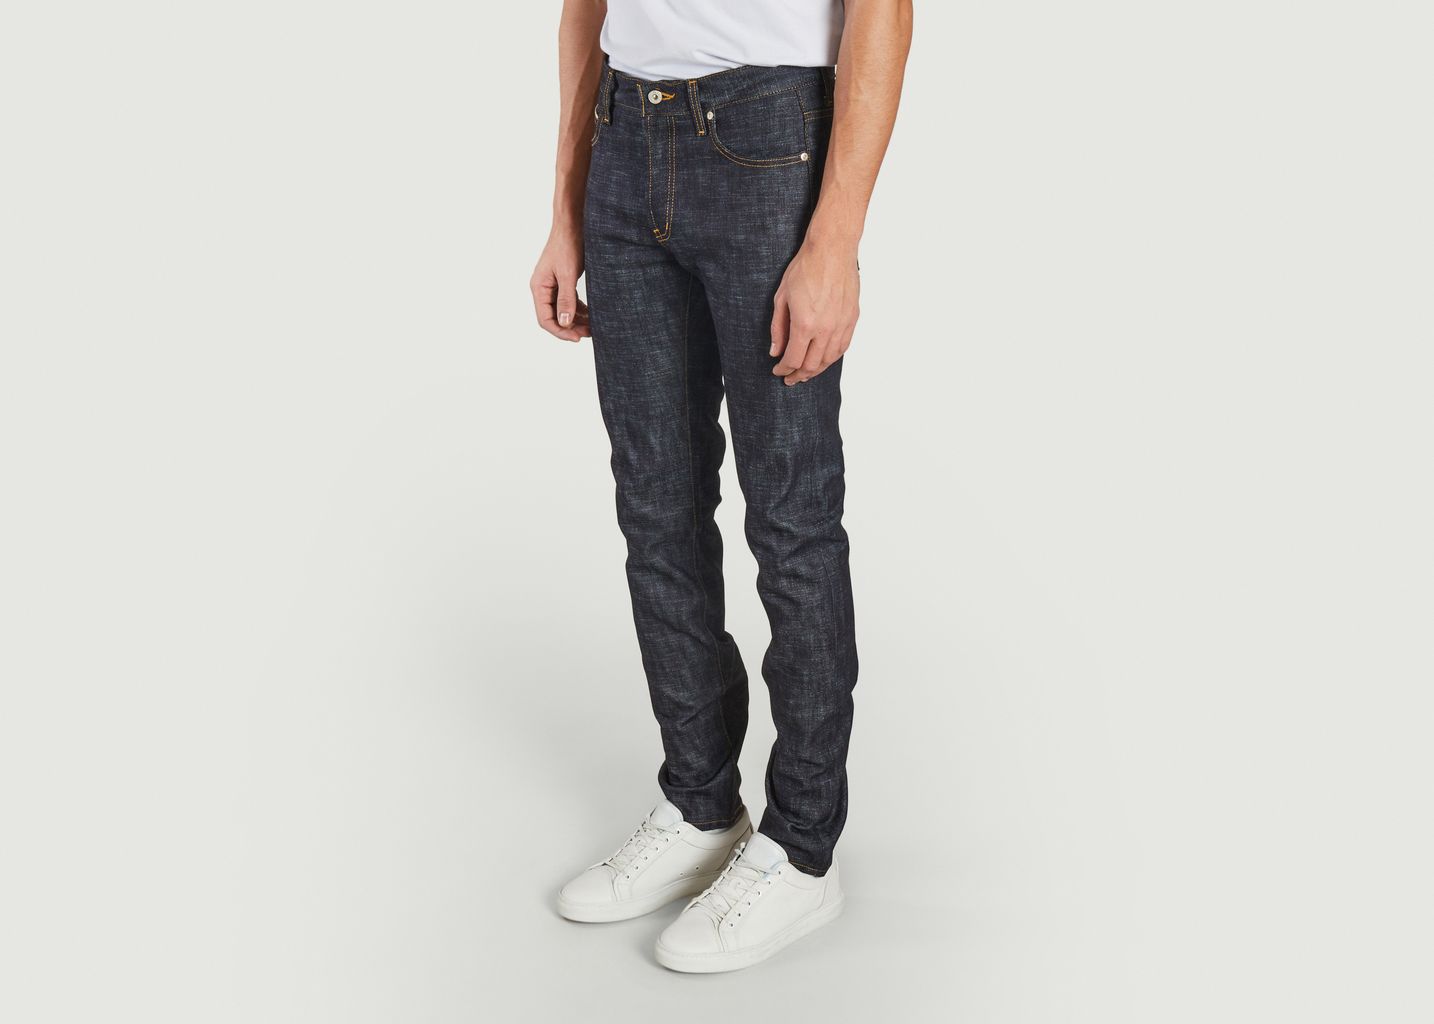 Super Guy Chinese New Year Water Rabbit Jeans  - Naked and Famous